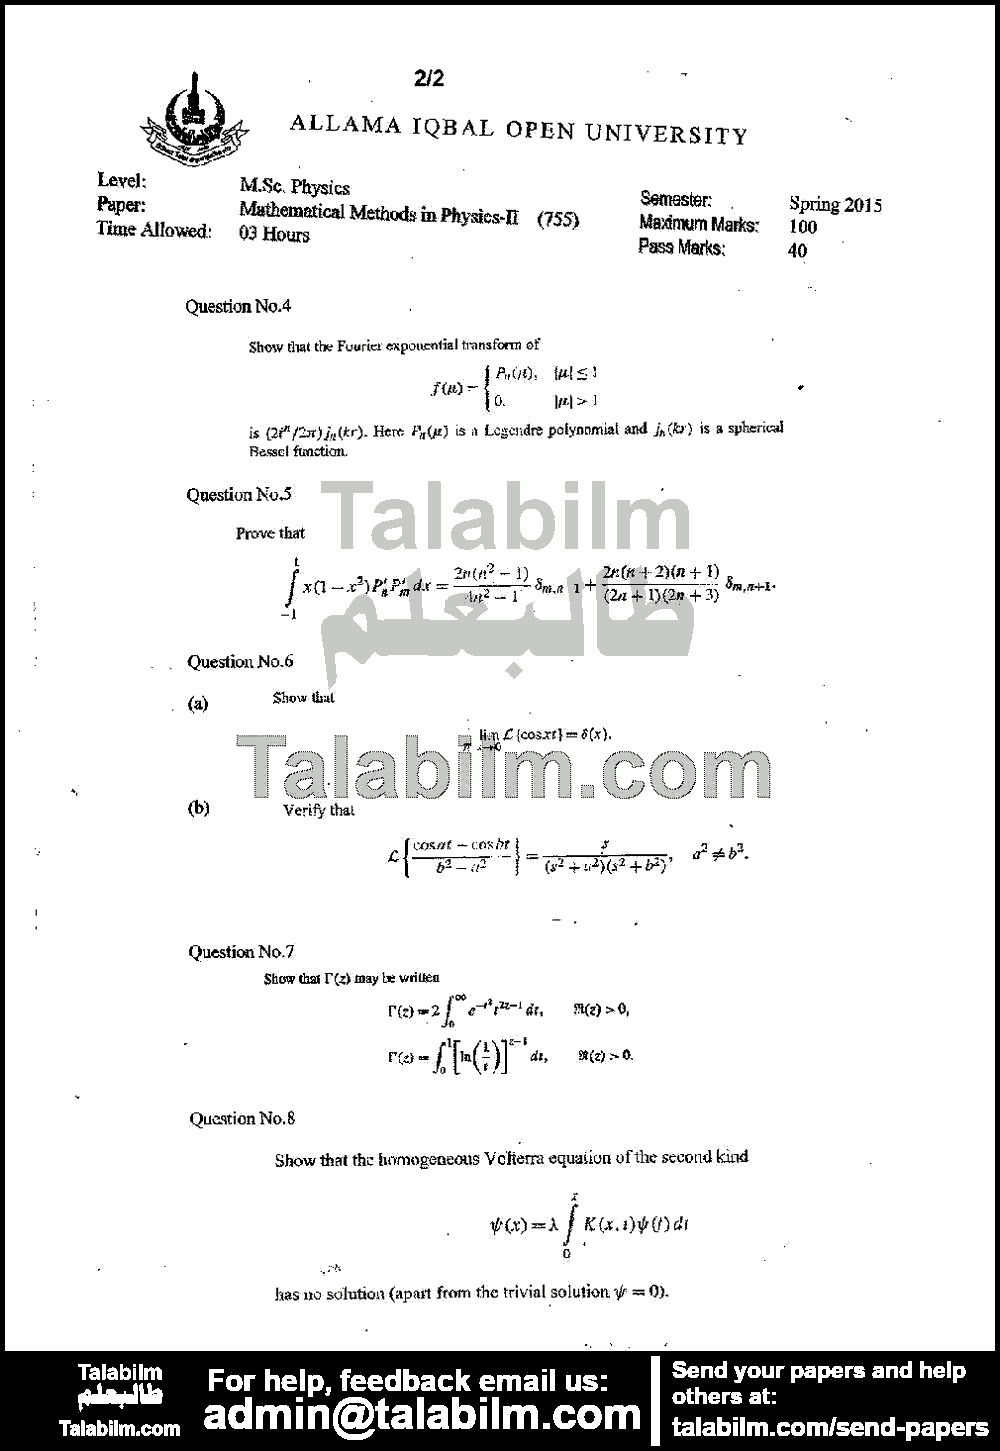 Mathematical Methods in Physics-II 755 past paper for Spring 2015 Page No. 2